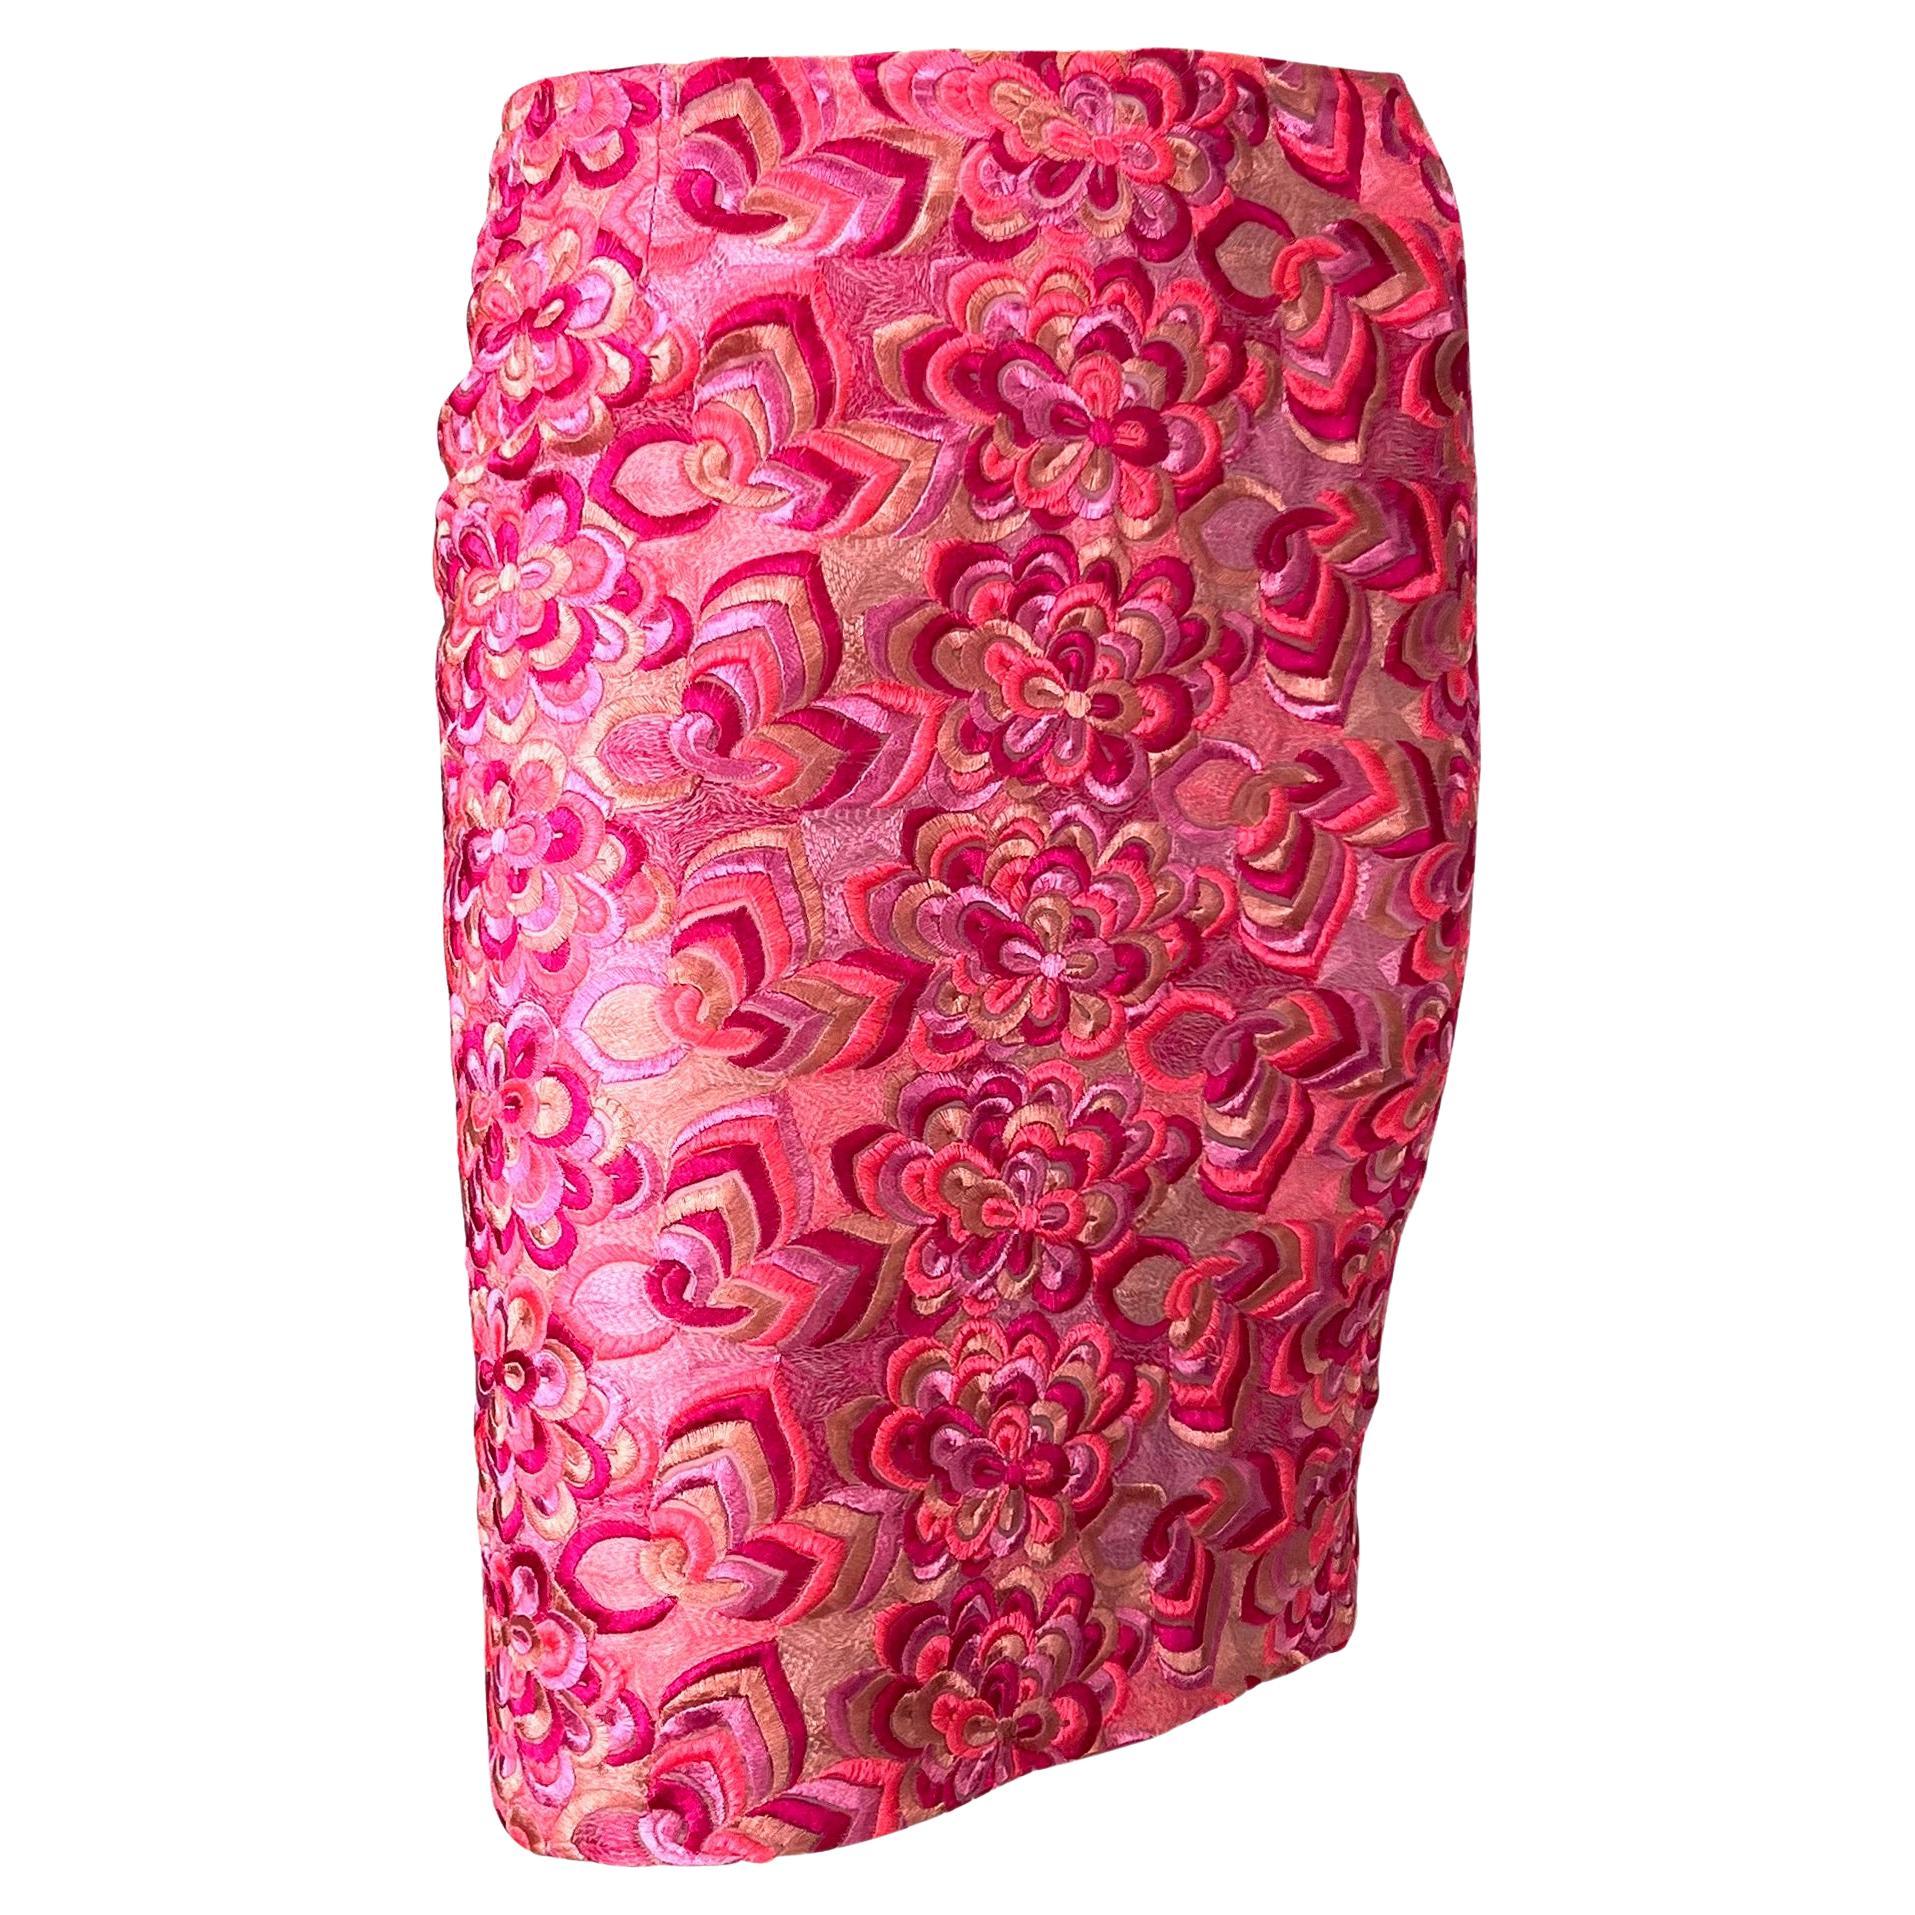 S/S 2000 Gianni Versace by Donatella Versace for Gianni Versace for Gianni Versace for Gianni Versace for Gianni Versace by Donatella Neon Pink Floral Embroidered Skirt en vente 1